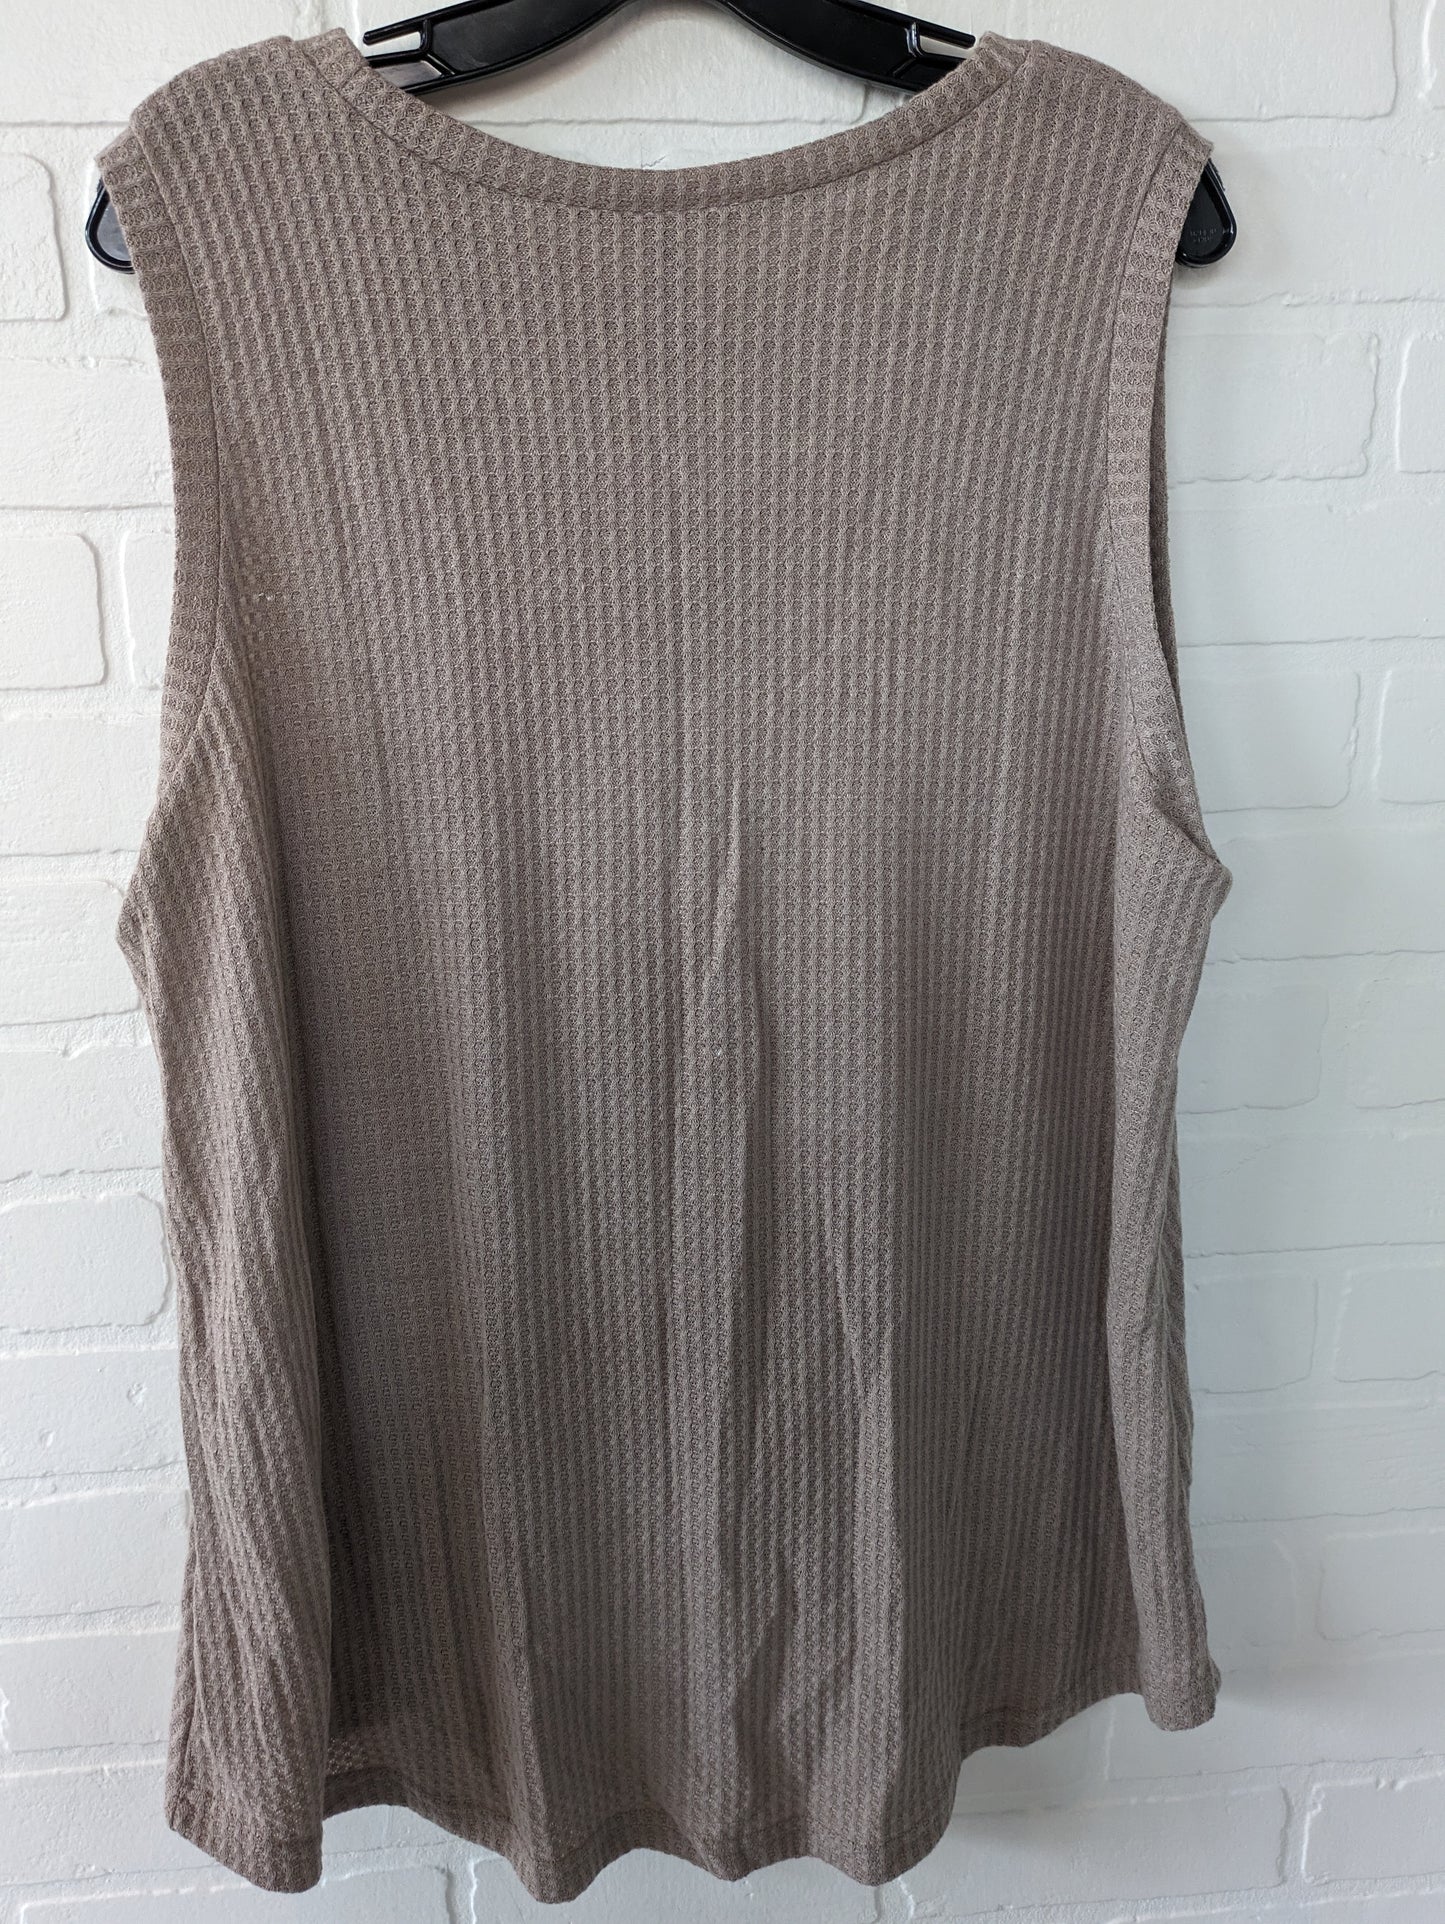 Top Sleeveless Basic By Clothes Mentor  Size: 2x